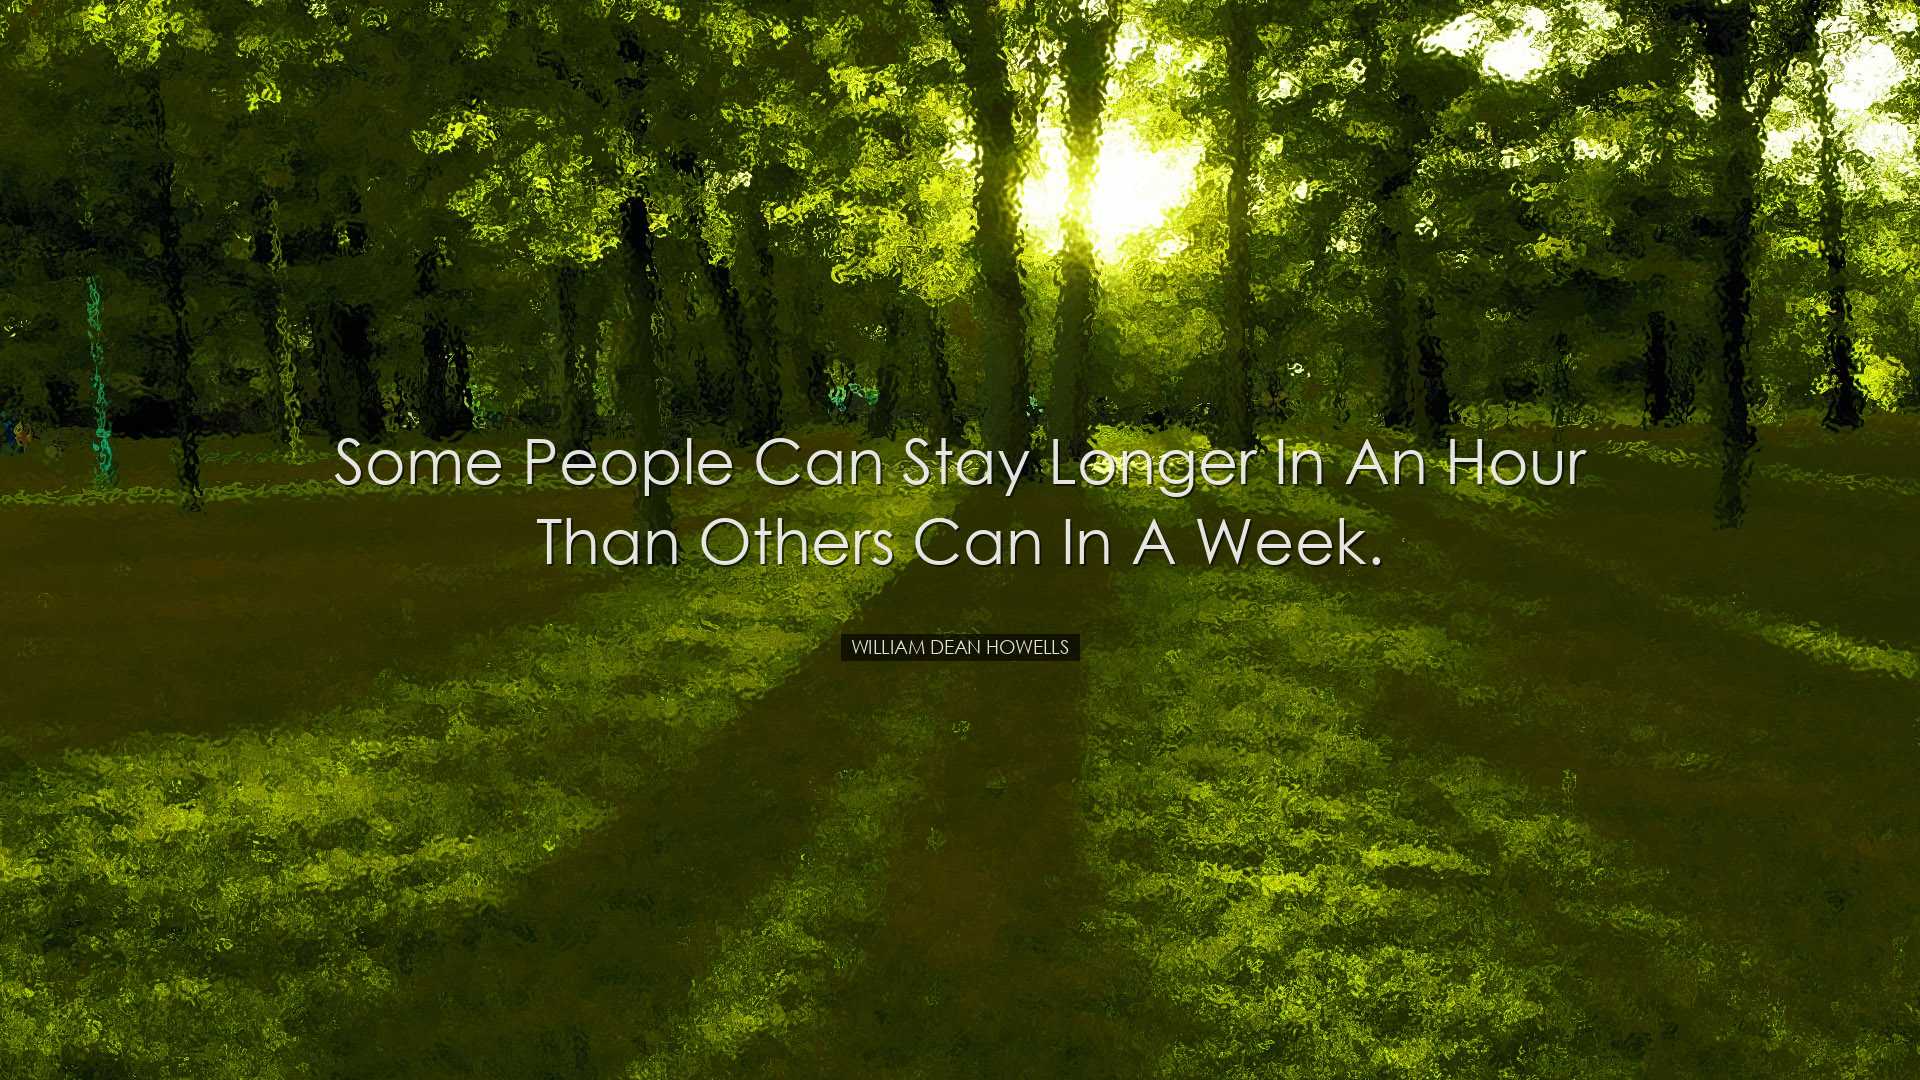 Some people can stay longer in an hour than others can in a week.